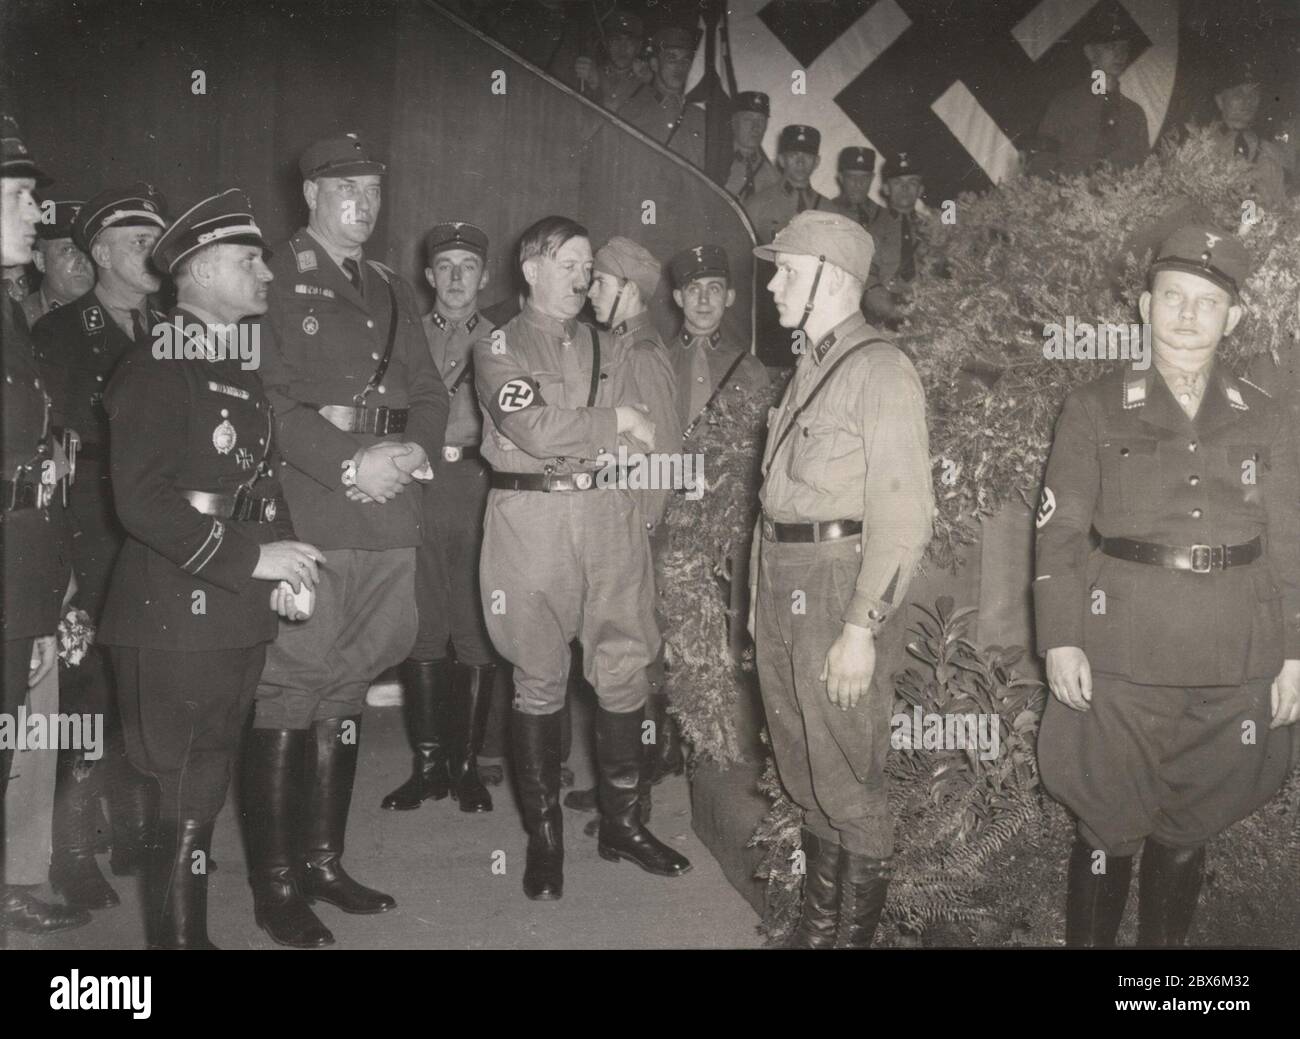 Rally - Hitler, Brueckner, Dietrich, Sepp. Heinrich Hoffmann Photographs 1933 Adolf Hitler's official photographer, and a Nazi politician and publisher, who was a member of Hitler's intimate circle. Stock Photo